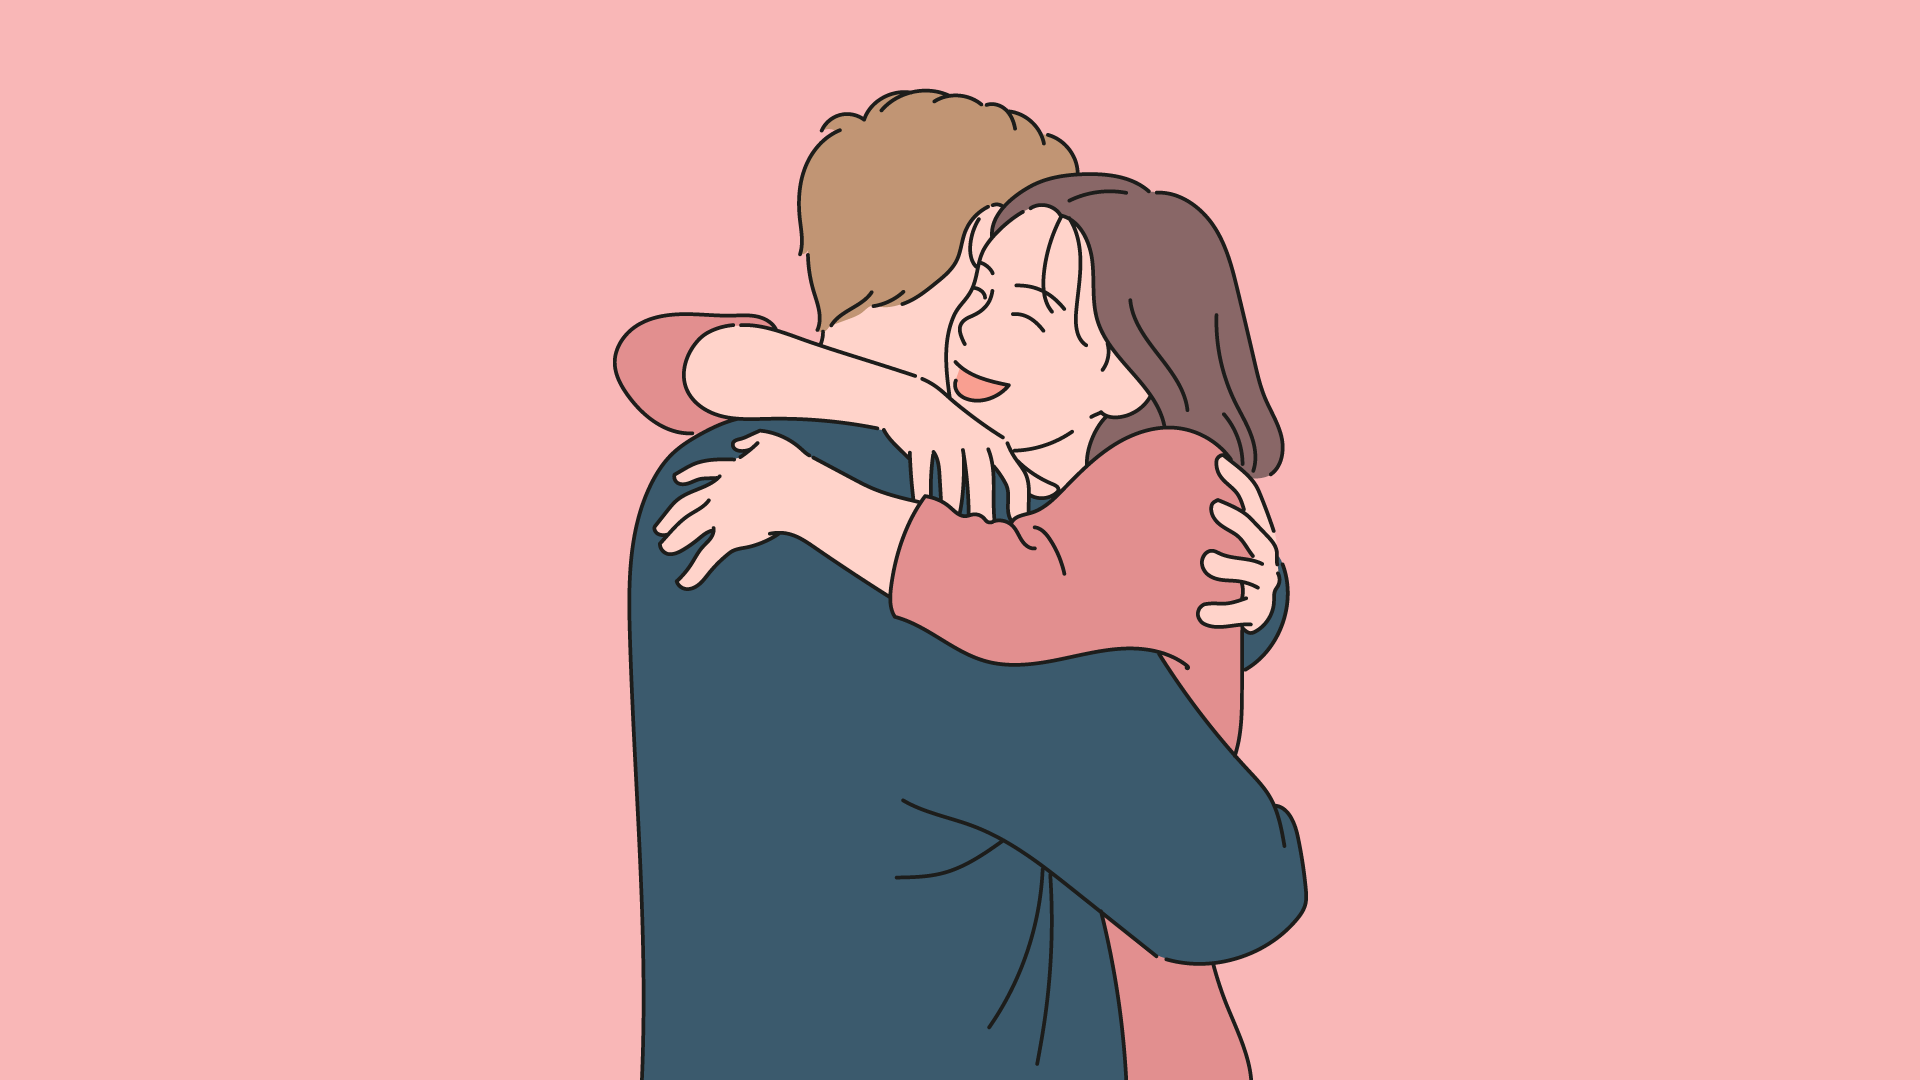 Man with blonde hair and teal jumper, and woman with brown hair and pink jumper hugging closely.